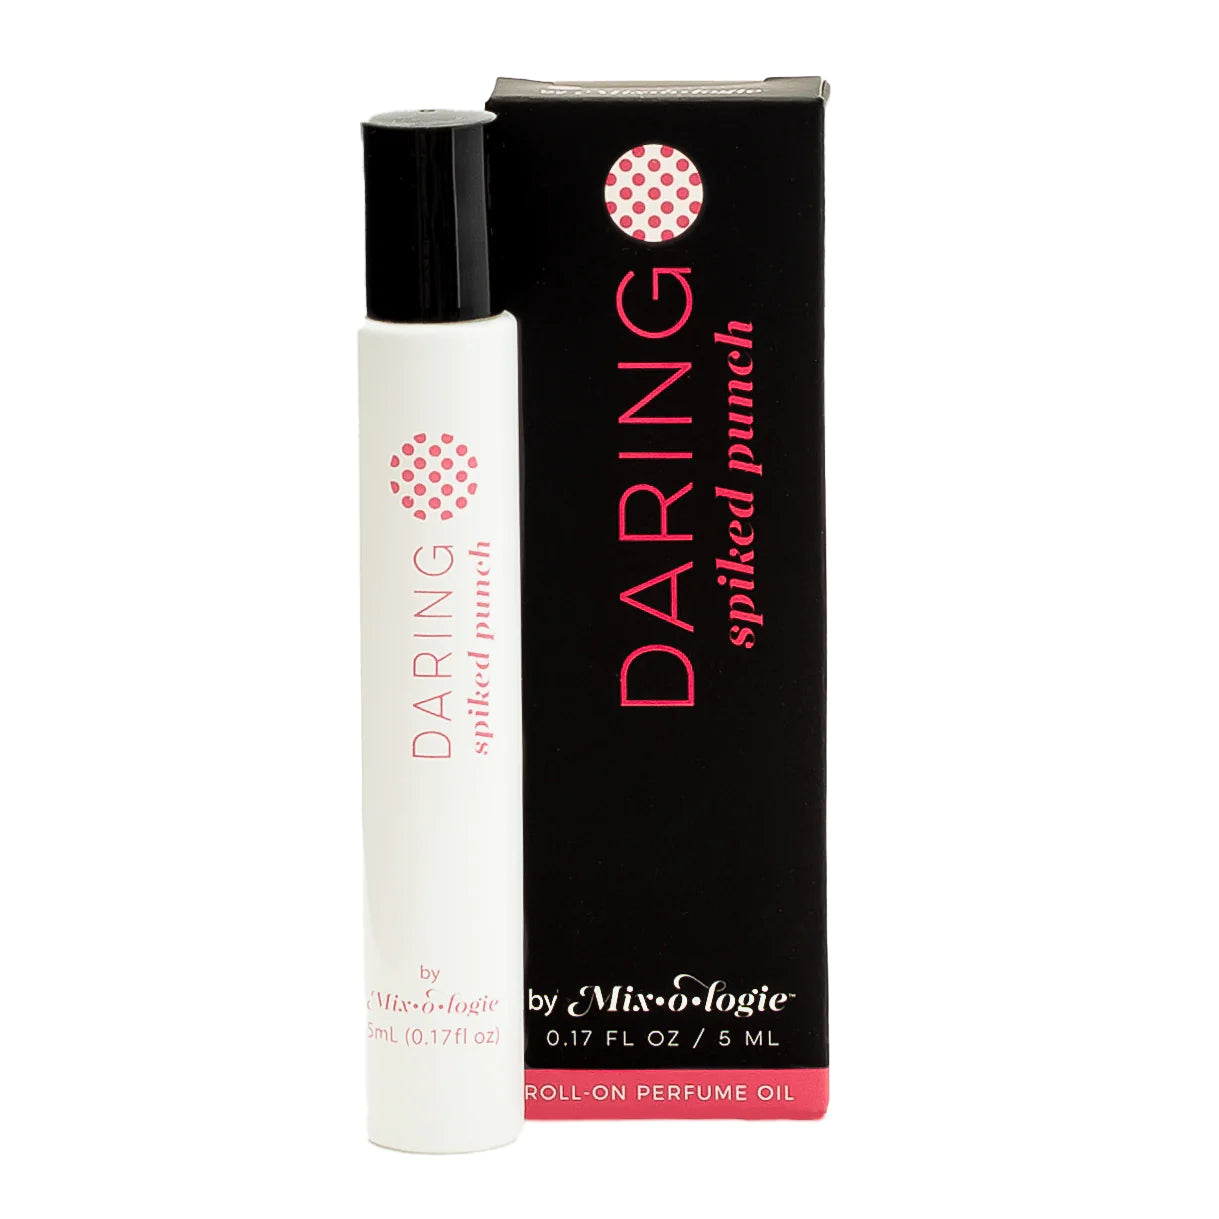 Mixologie - DARING (Spiked Punch) Perfume Oil Rollerball (5ml)